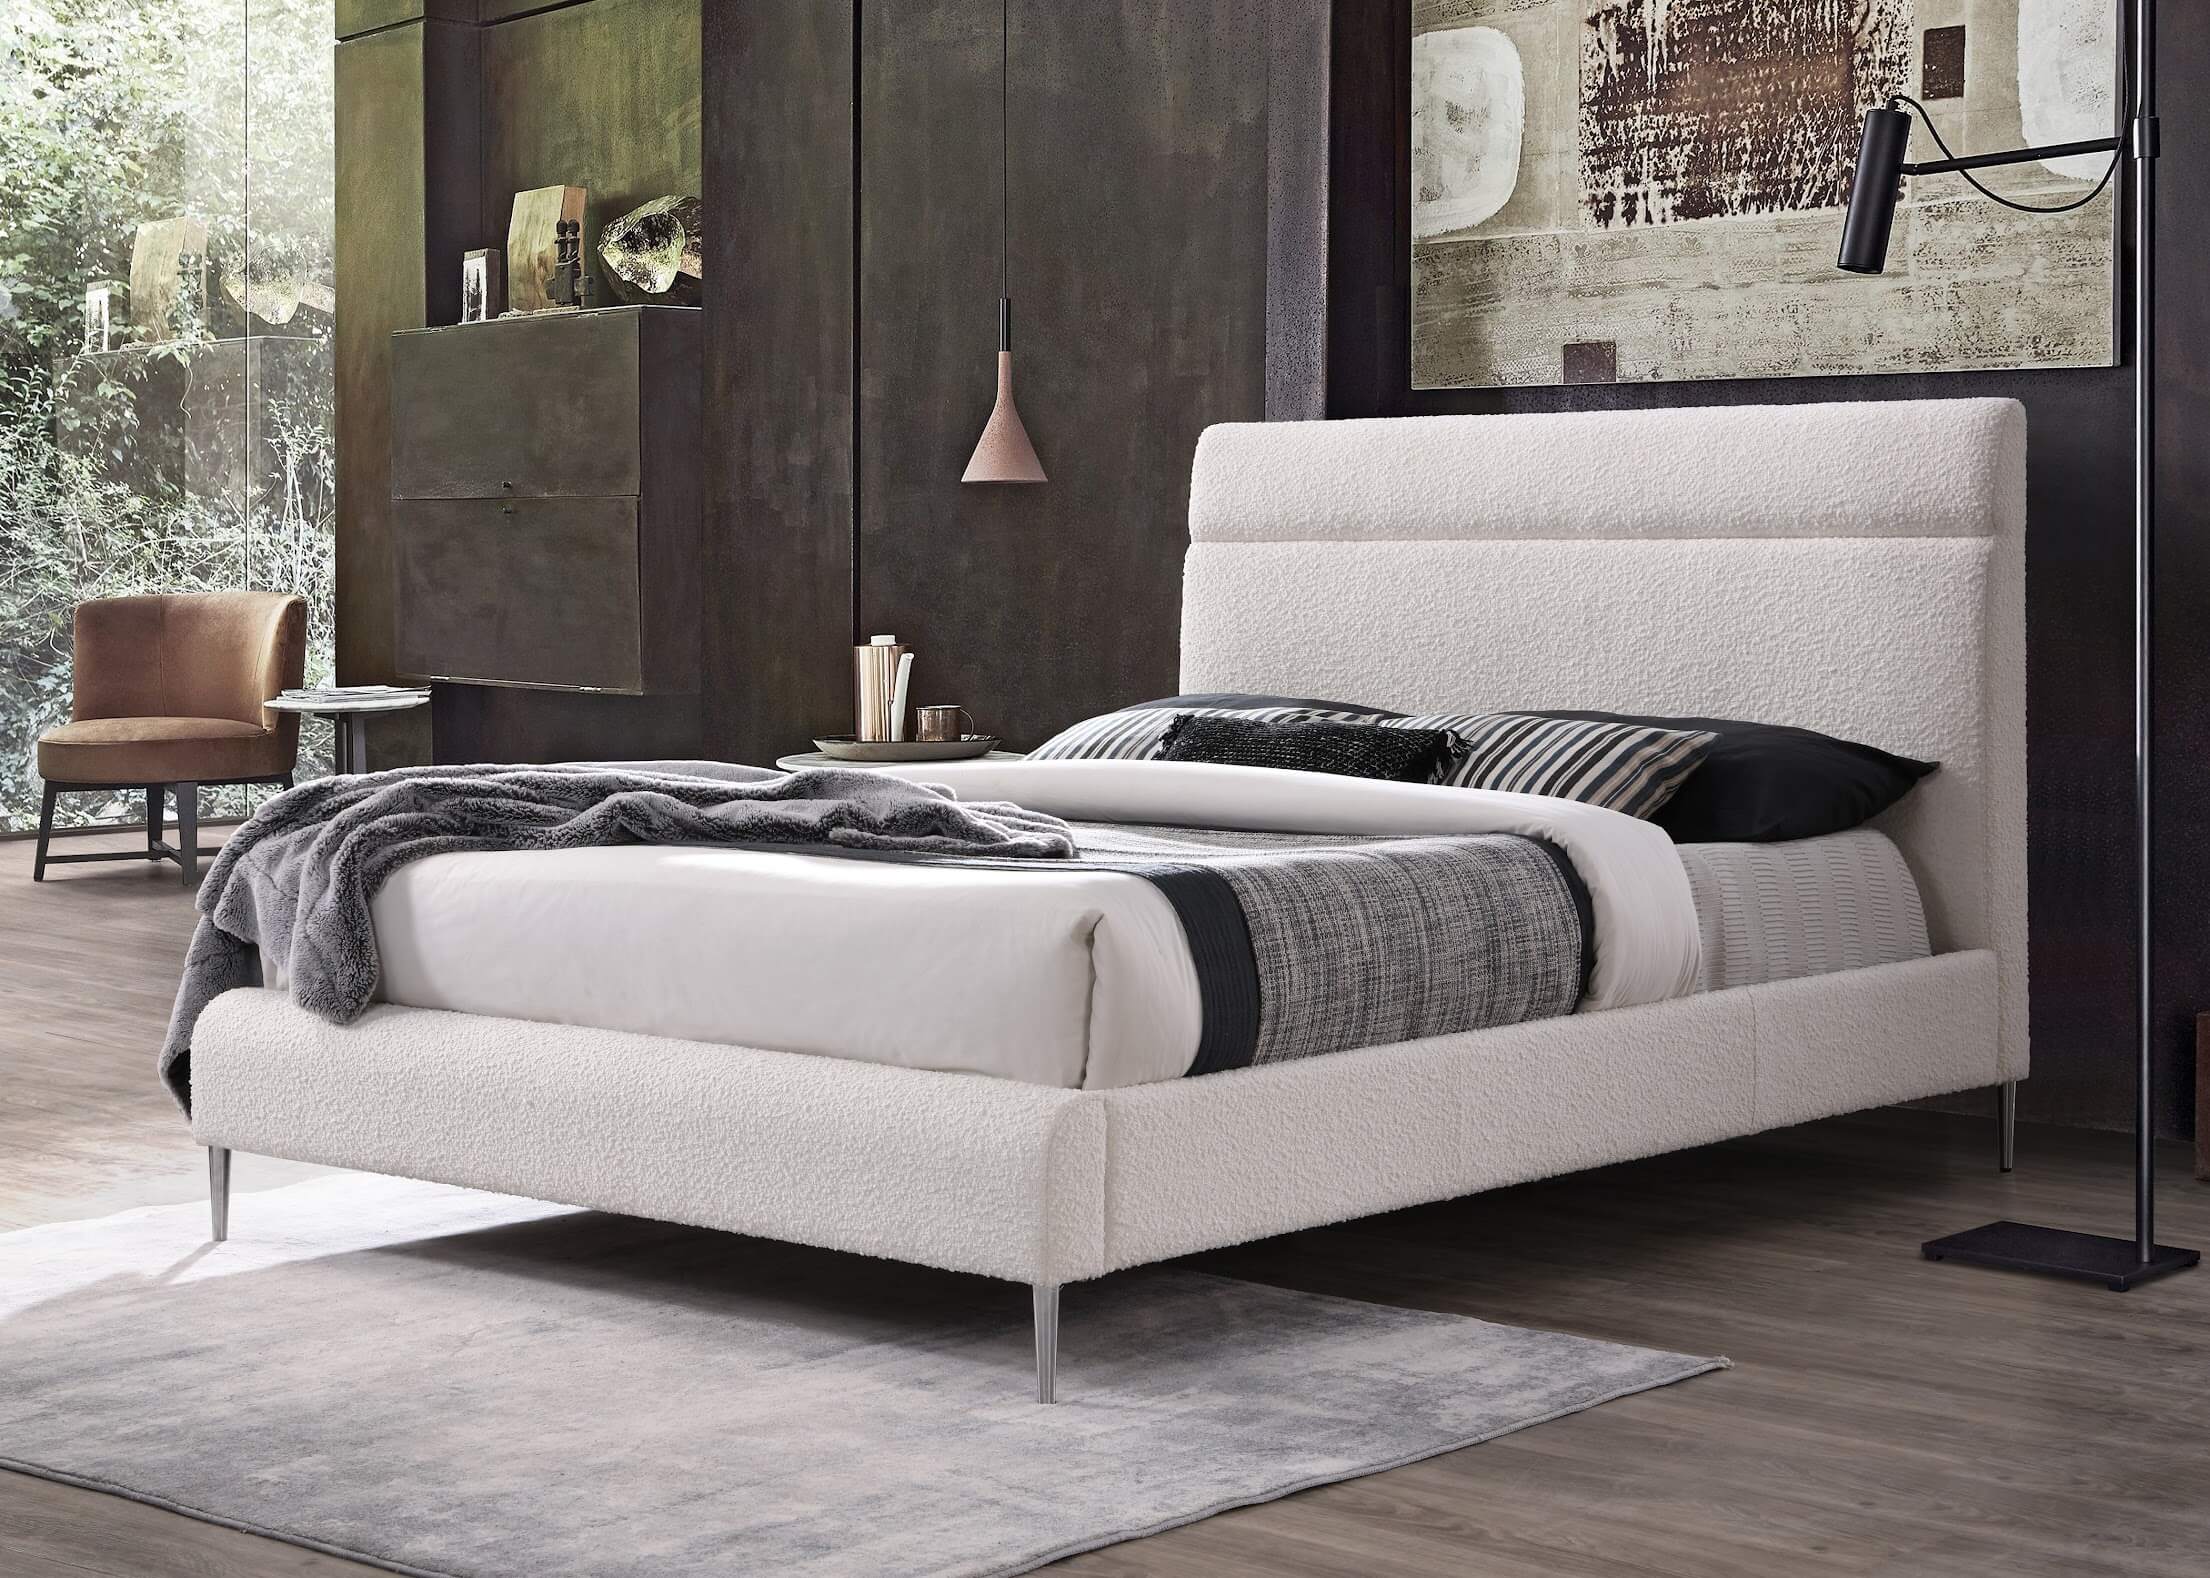 Windsor Bed: Elegant White with Silver Legs